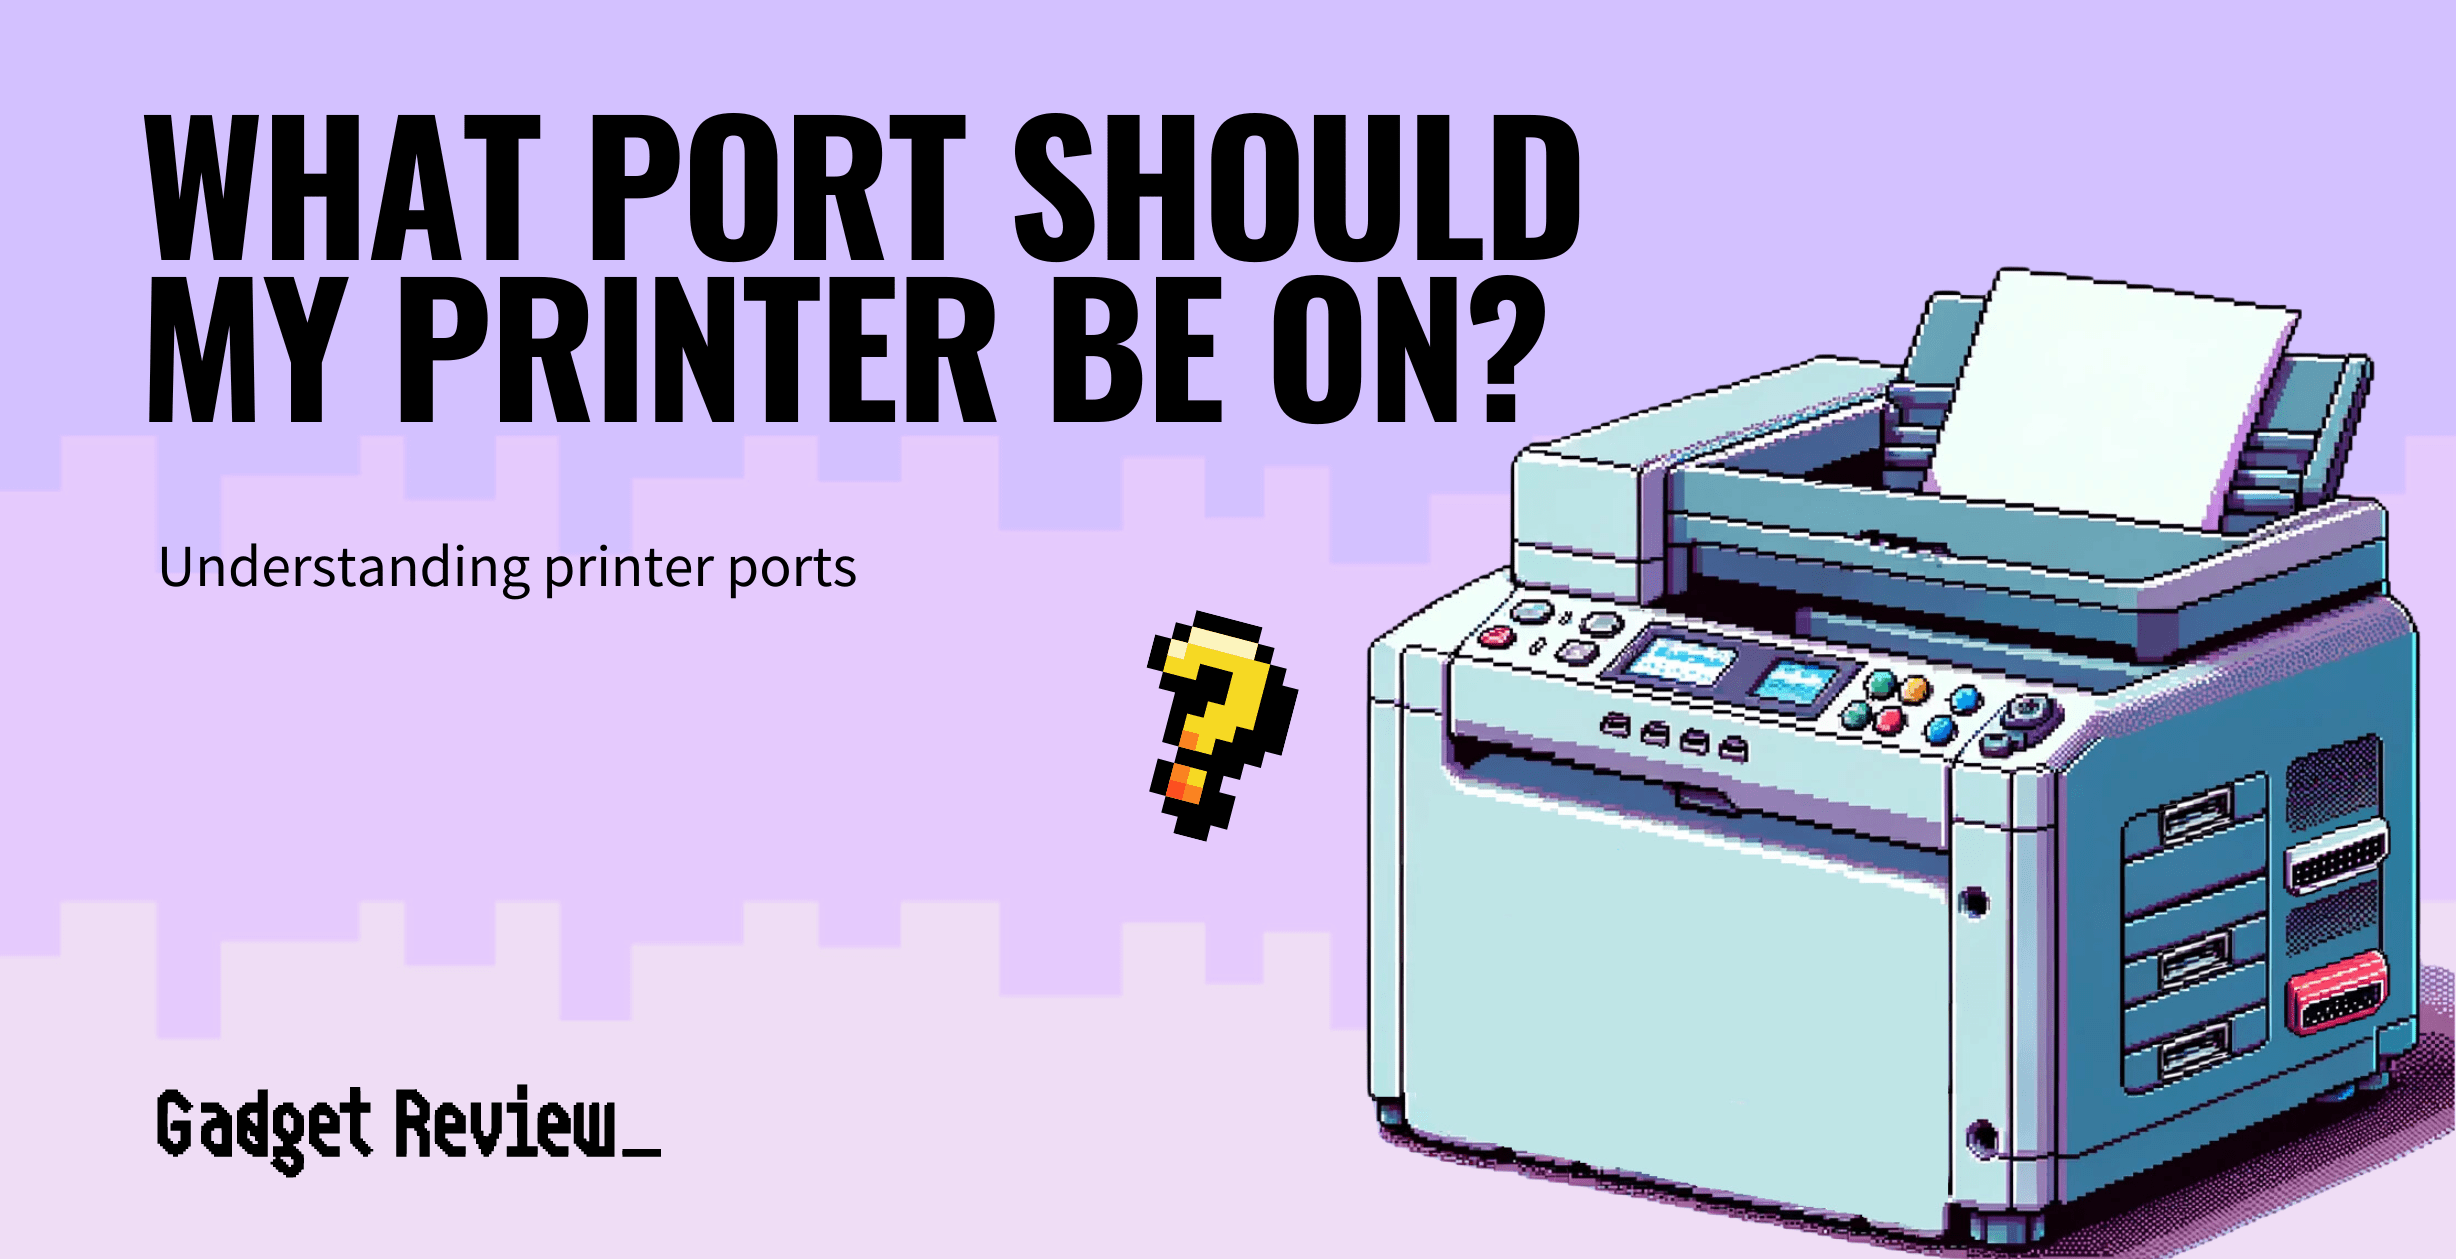 What Port Should My Printer Be On?